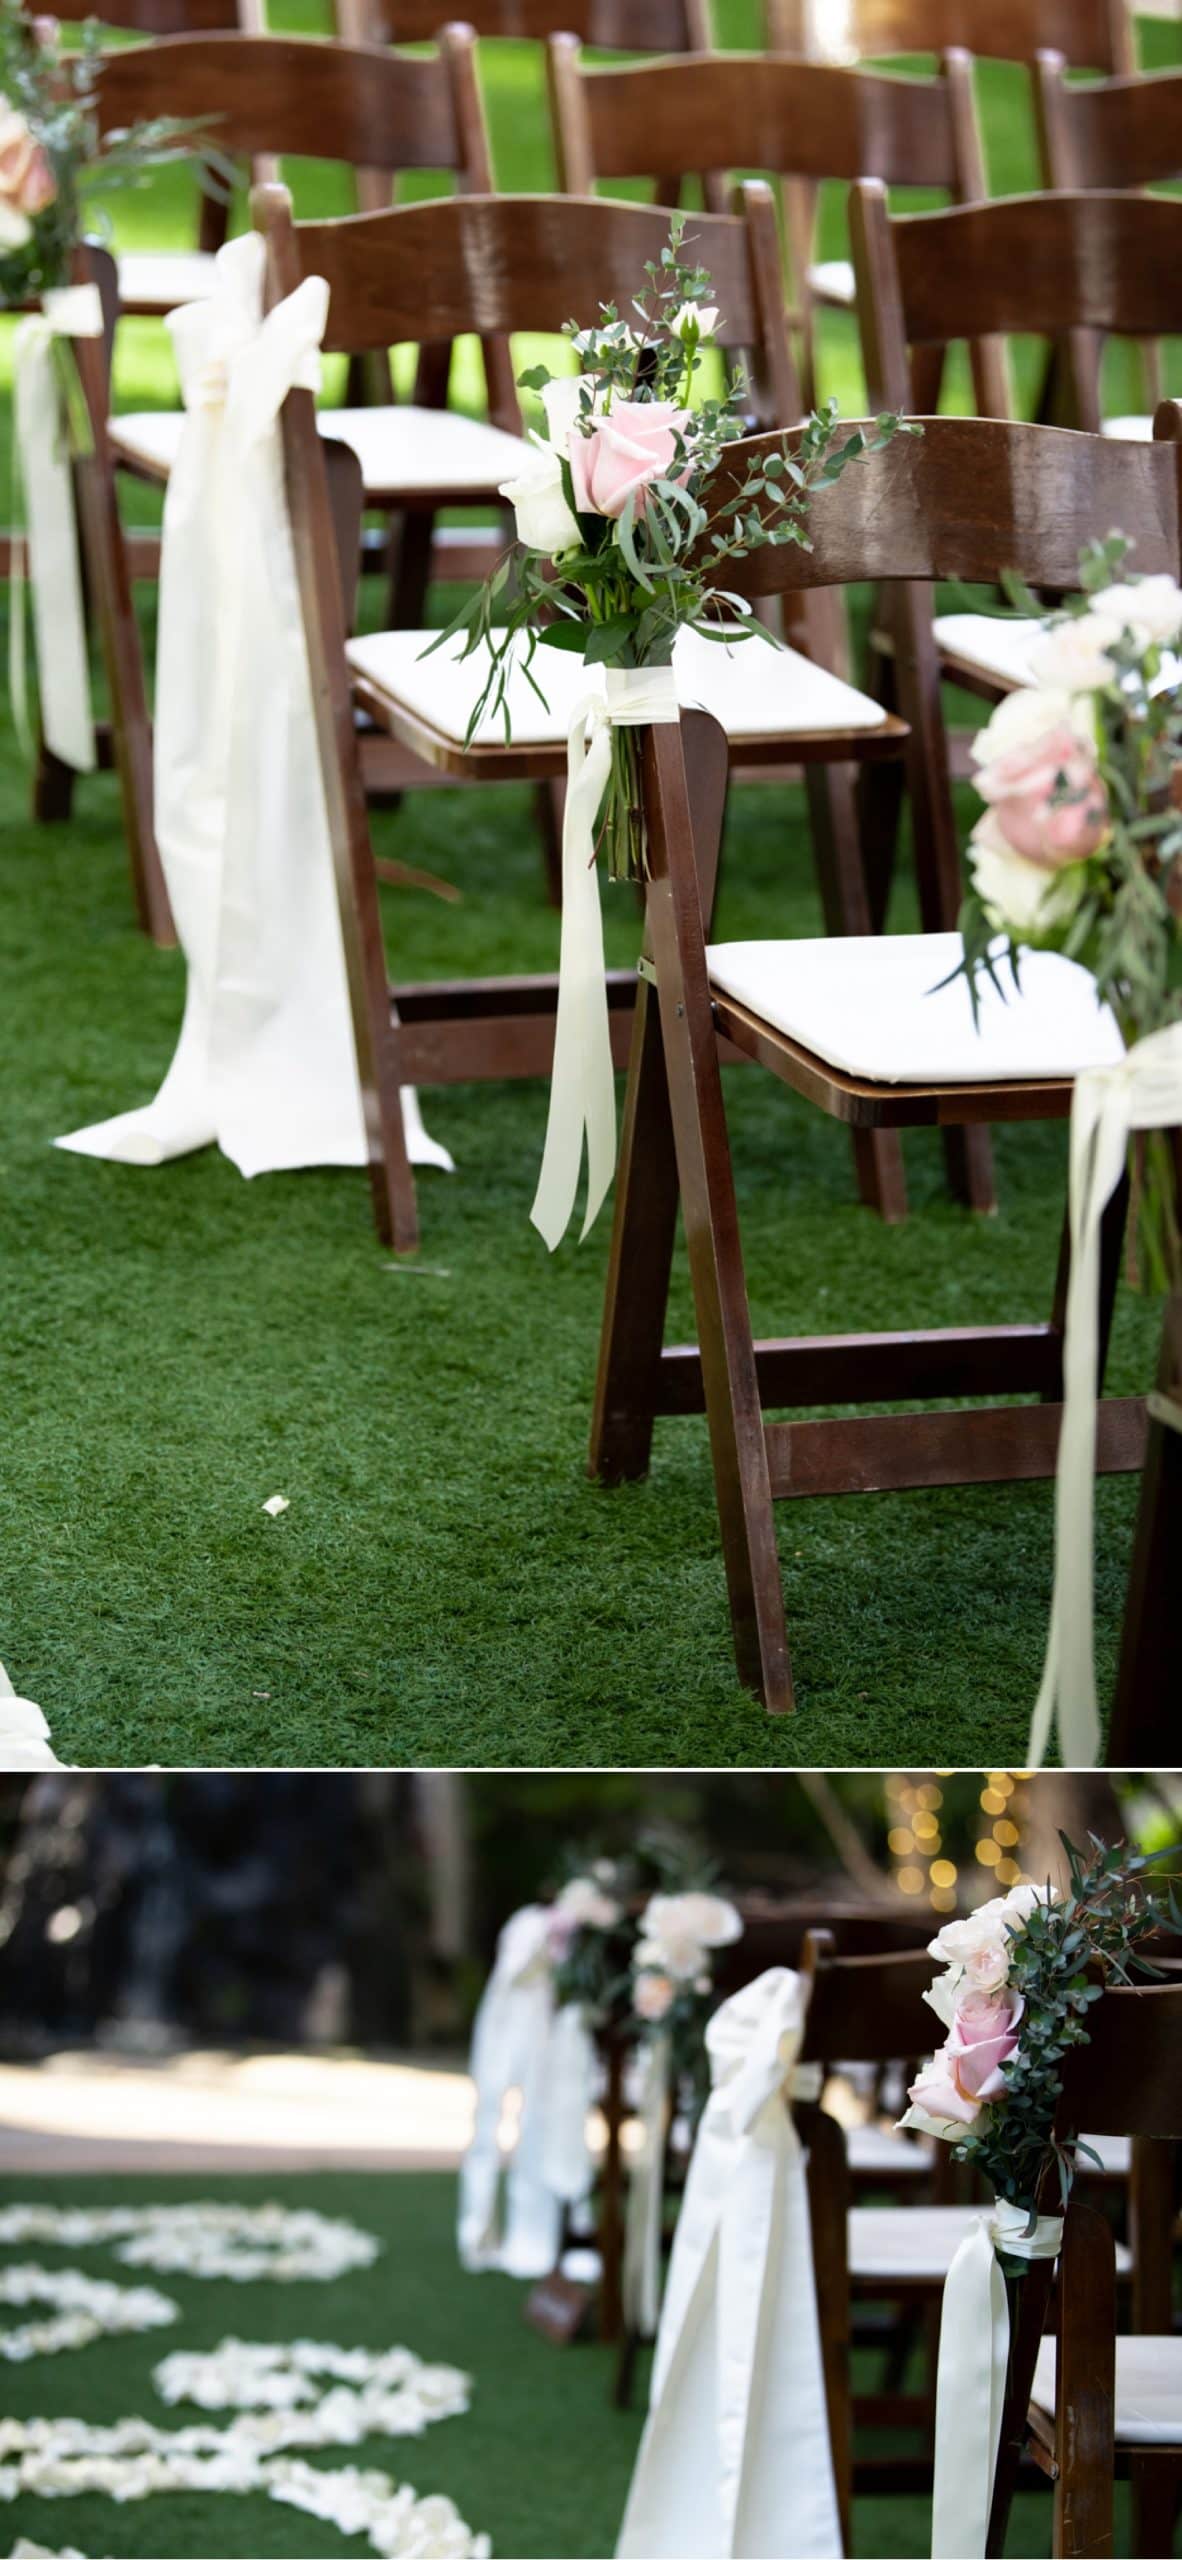 Flowers on ceremony chairs